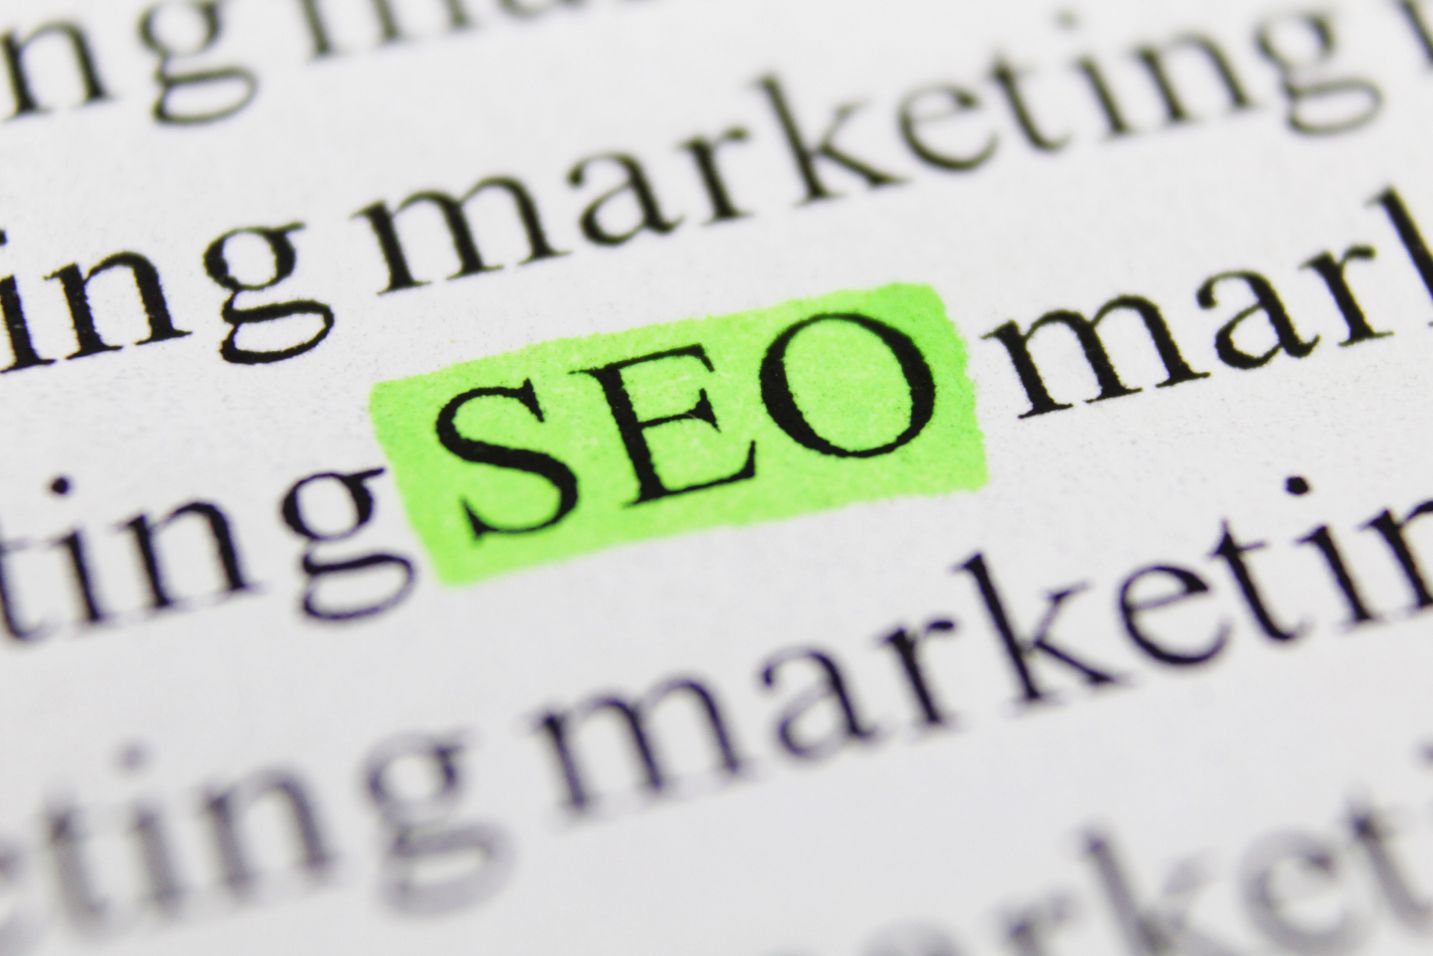 What does SEO stand for?